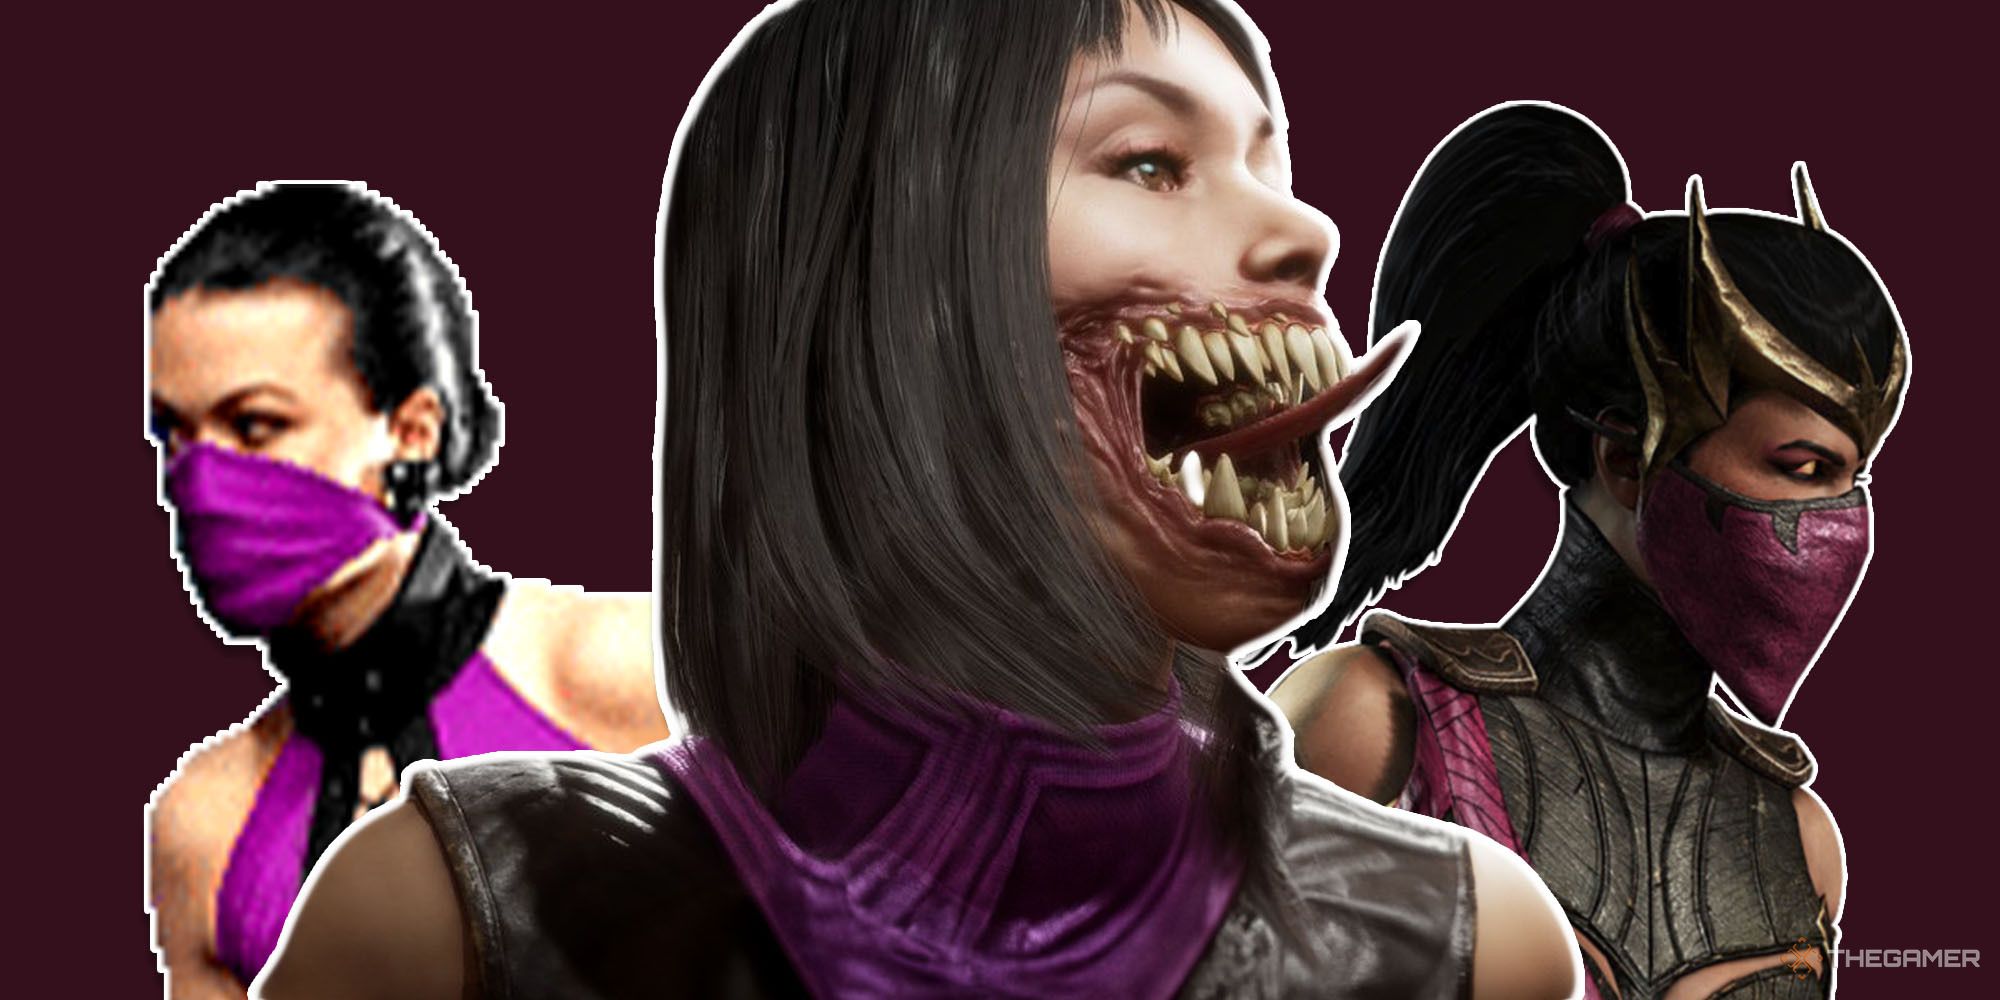 Three different versions of Mileena. On the left, we see her first, retro appearence, played by a real actor but pixelated. She is in a pink leotard and mask. In the middle, we see her Mortal Kombat 11 appearence. She doesn't have her mask on, showing her huge, fanged teeth. On the right, there's her Mortal Kombat X form, wearing a crown.